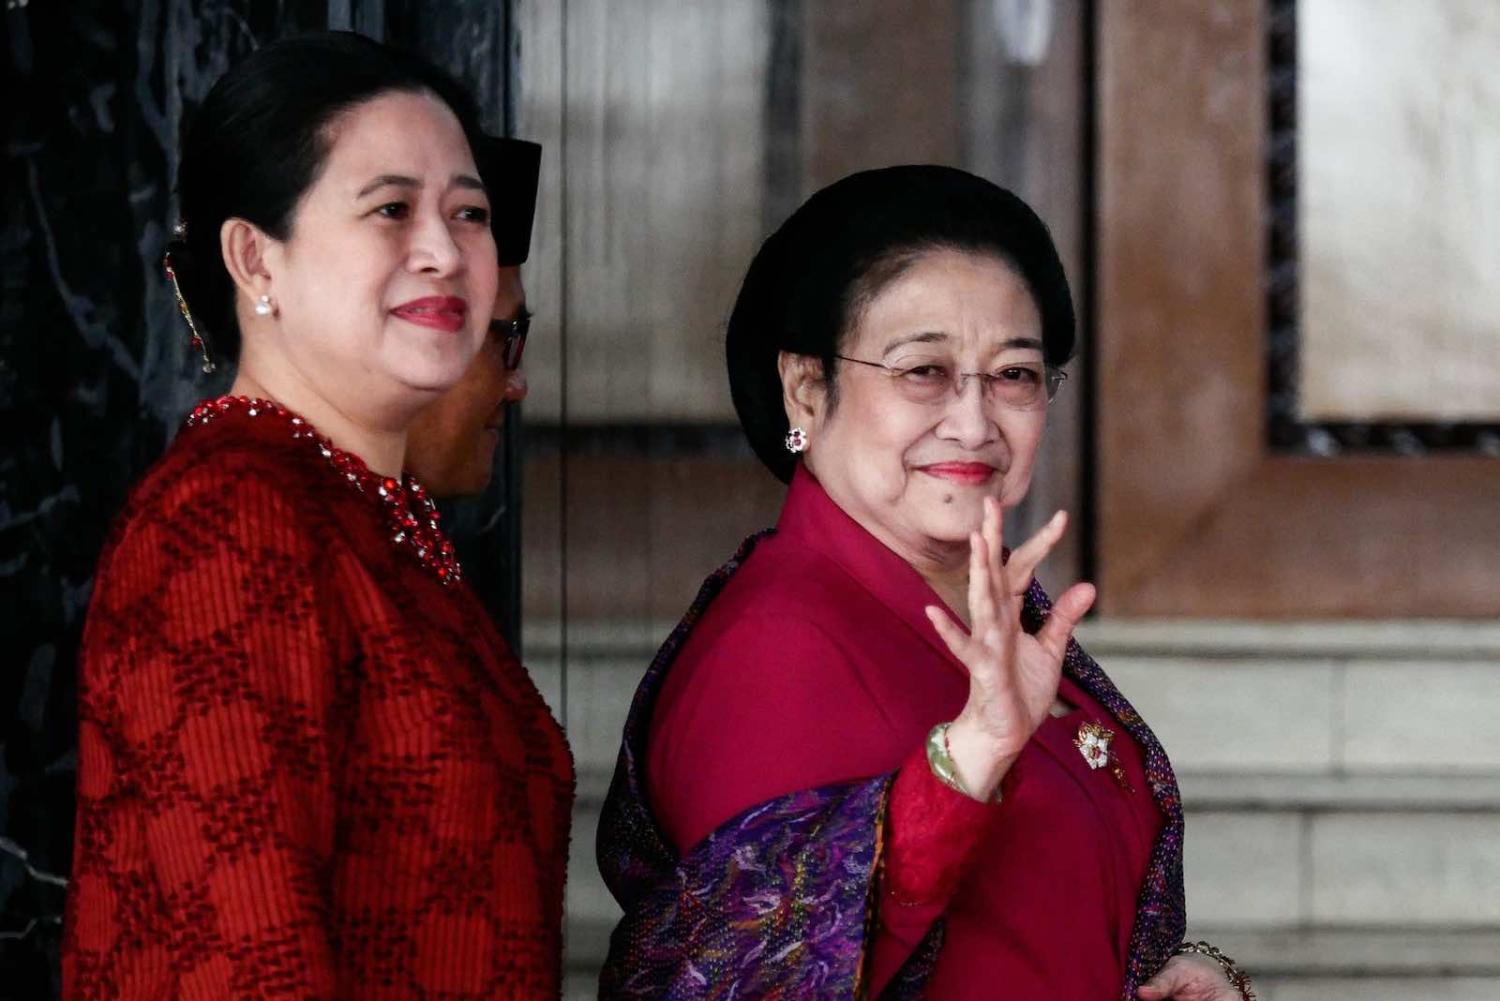 Former Indonesian president Megawati Sukarnoputri, right, and her daughter Puan Maharani, seen as the likely successor Megawati as leader of the Indonesian Democratic Party of Struggle (Anton Raharjo/Anadolu Agency via Getty Images)